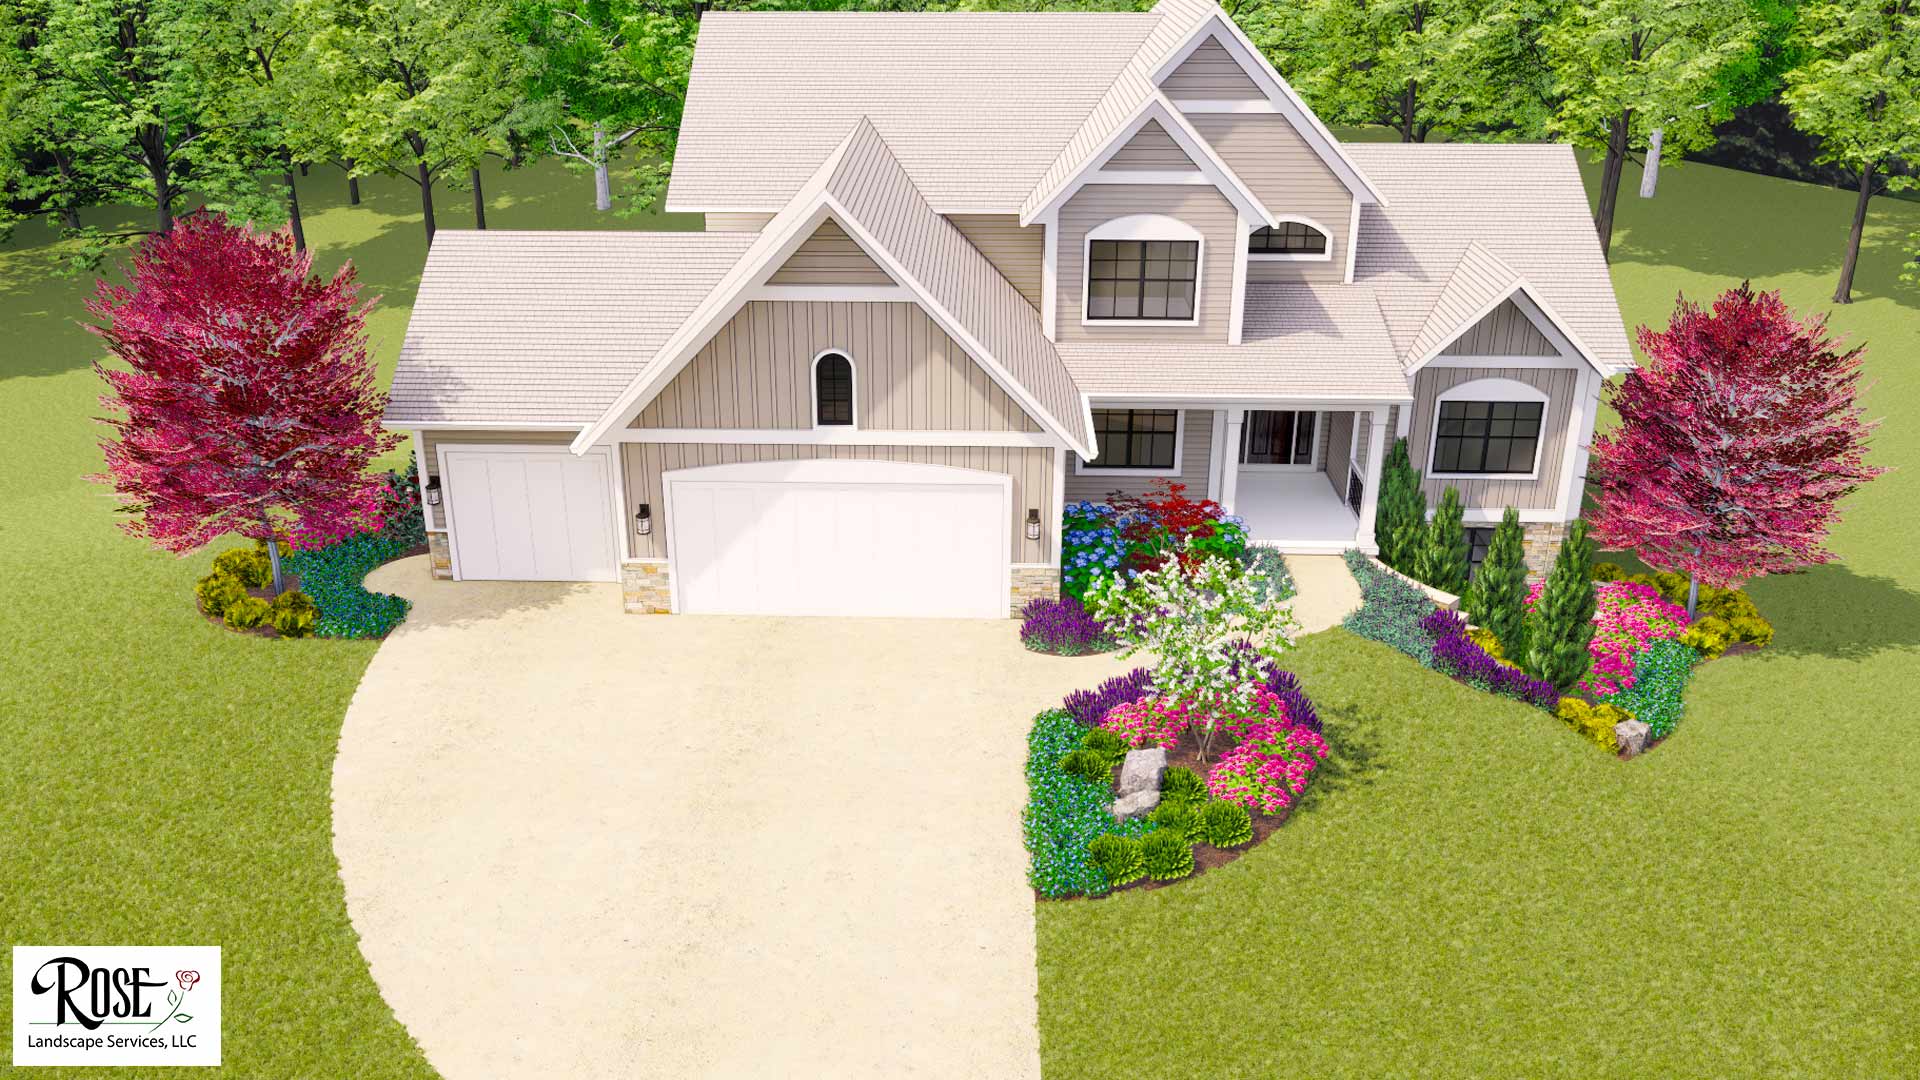 Design Renderings - Are They Really Needed for a Landscaping Project?